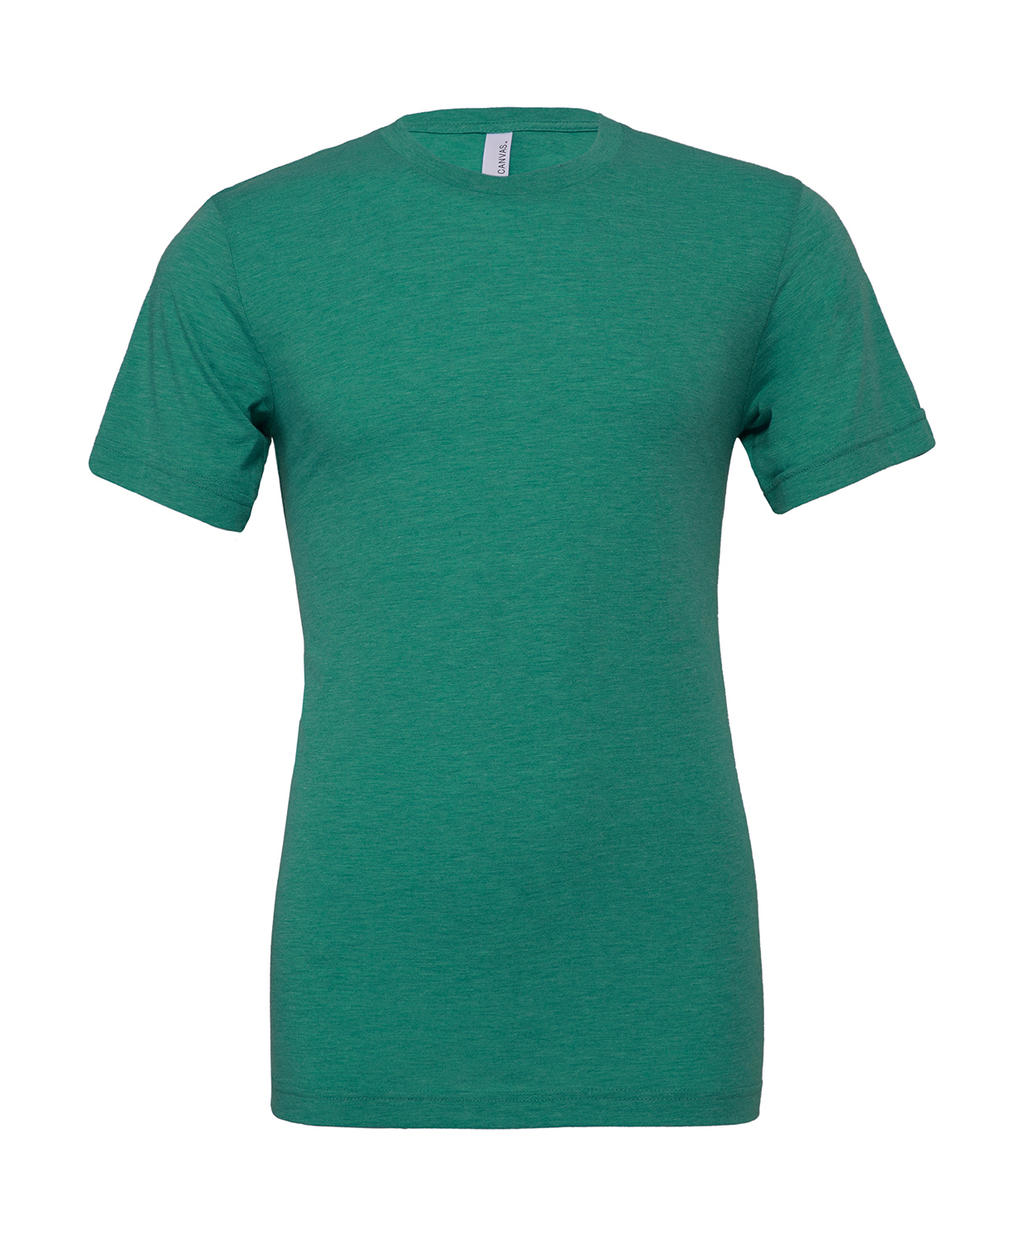  Unisex Triblend Short Sleeve Tee in Farbe Sea Green Triblend